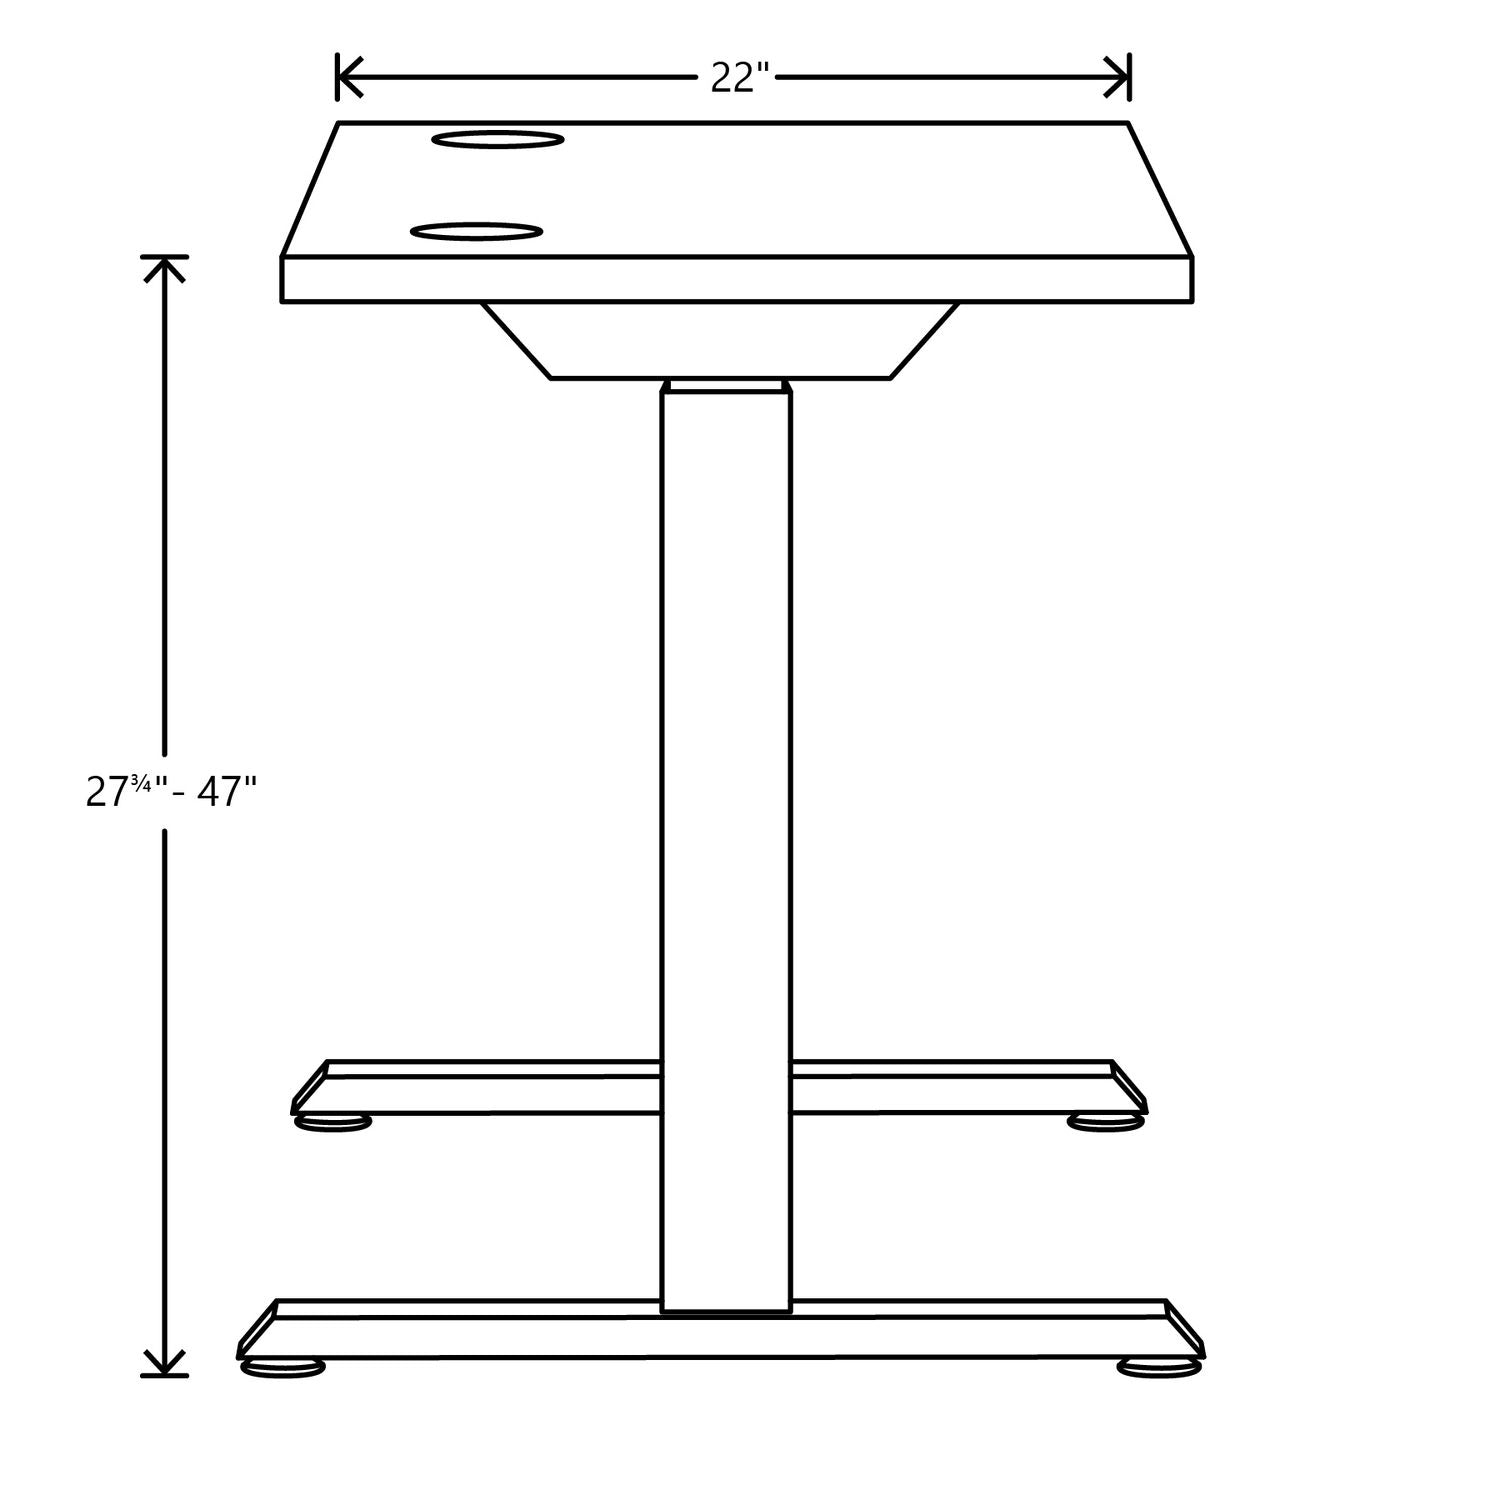 coordinate-height-adjustable-desk-bundle-2-stage-58-x-22-x-2775-to-47-silver-mesh\\black-ships-in-7-10-business-days_honhat2smbk2258 - 8